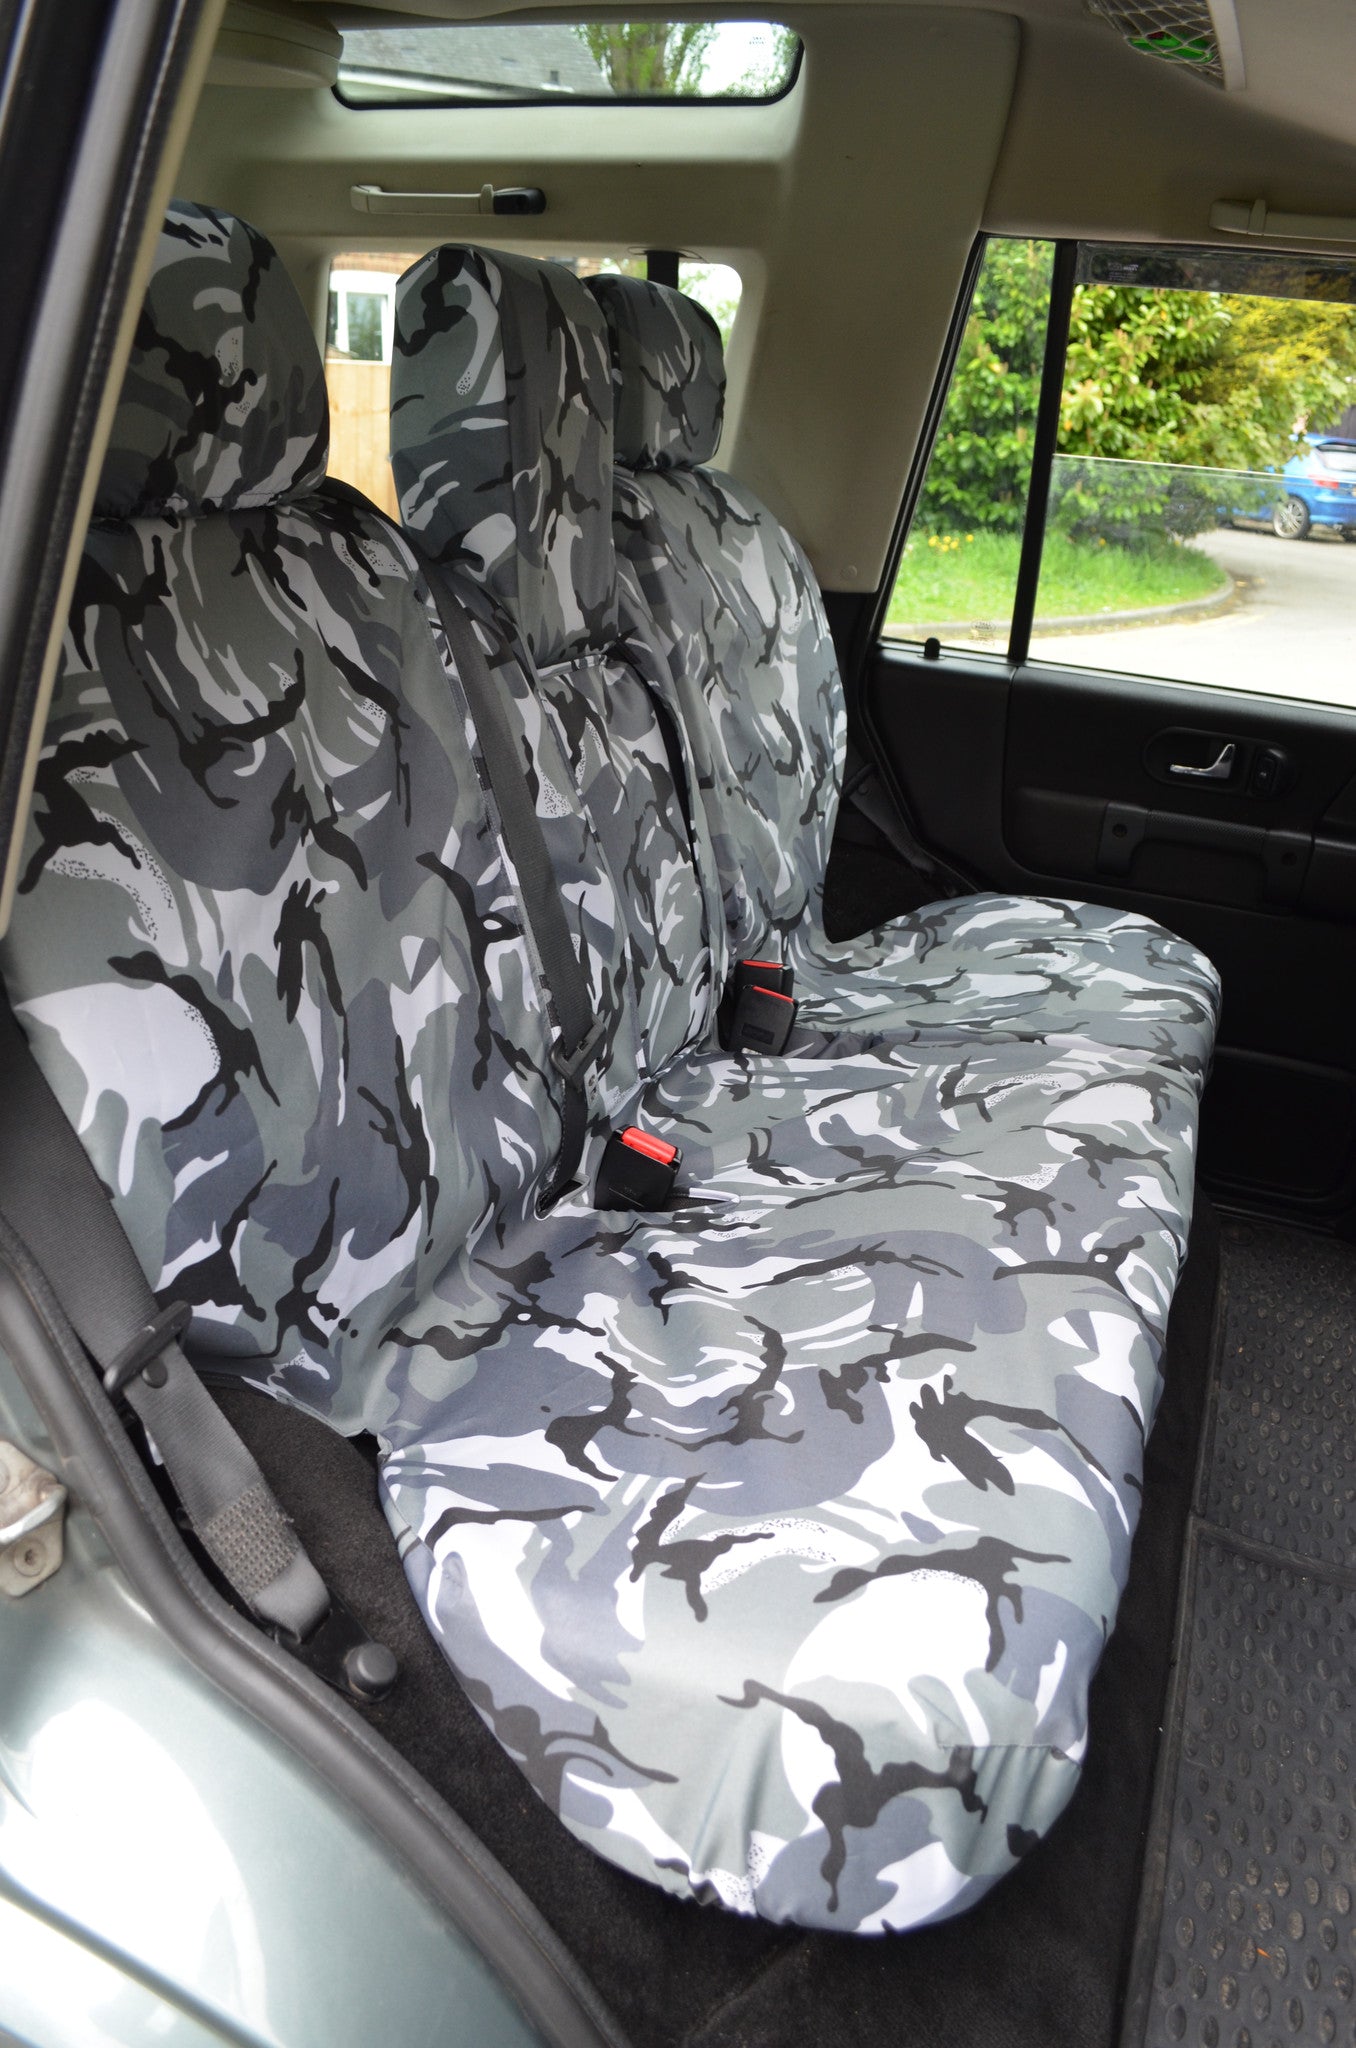 Land Rover Discovery 1998 - 2004 Series 2 Seat Covers Rear 2nd Row / Grey Camo Turtle Covers Ltd